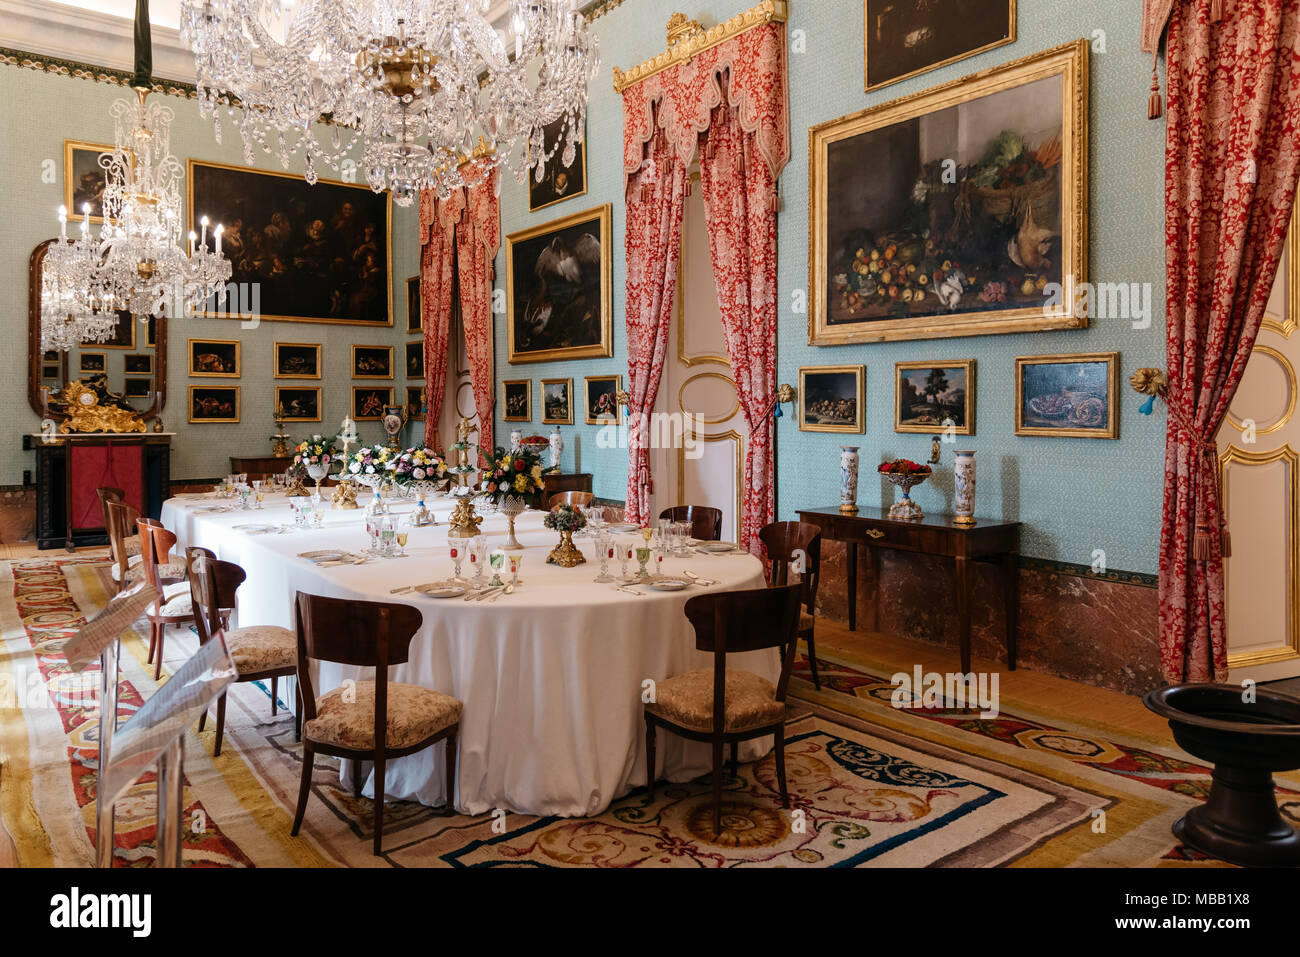 Navas de Riofrio, Spain - March 31, 2018: Decorate dinning room of Royal Palace of Riofrio in Segovia. The palace was used as a hunting lodge. Stock Photo